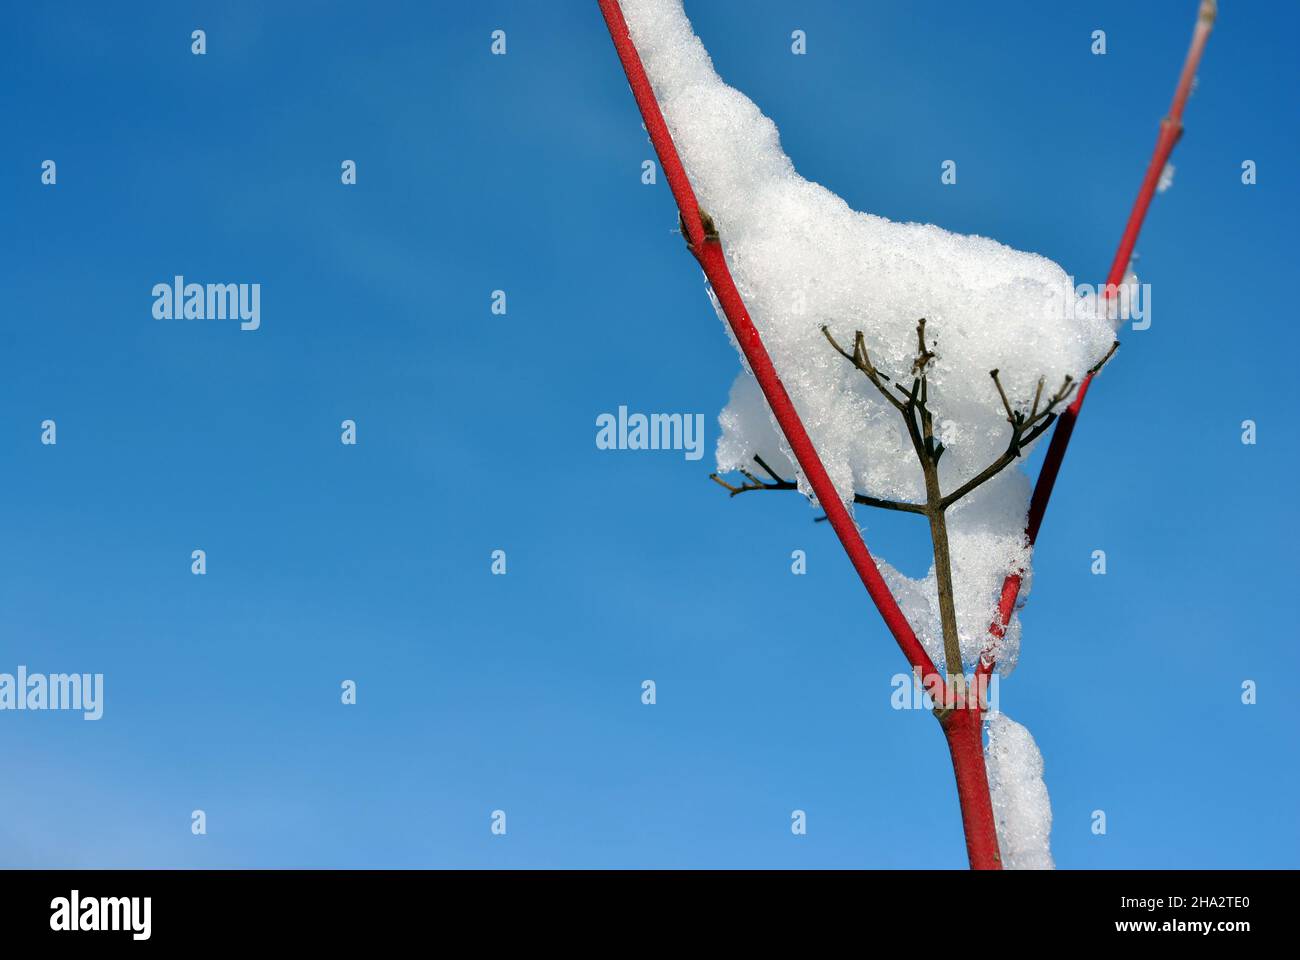 Pink tree branch covered with white fluffy snow close up detail, winter in forest, bright blue sky background Stock Photo